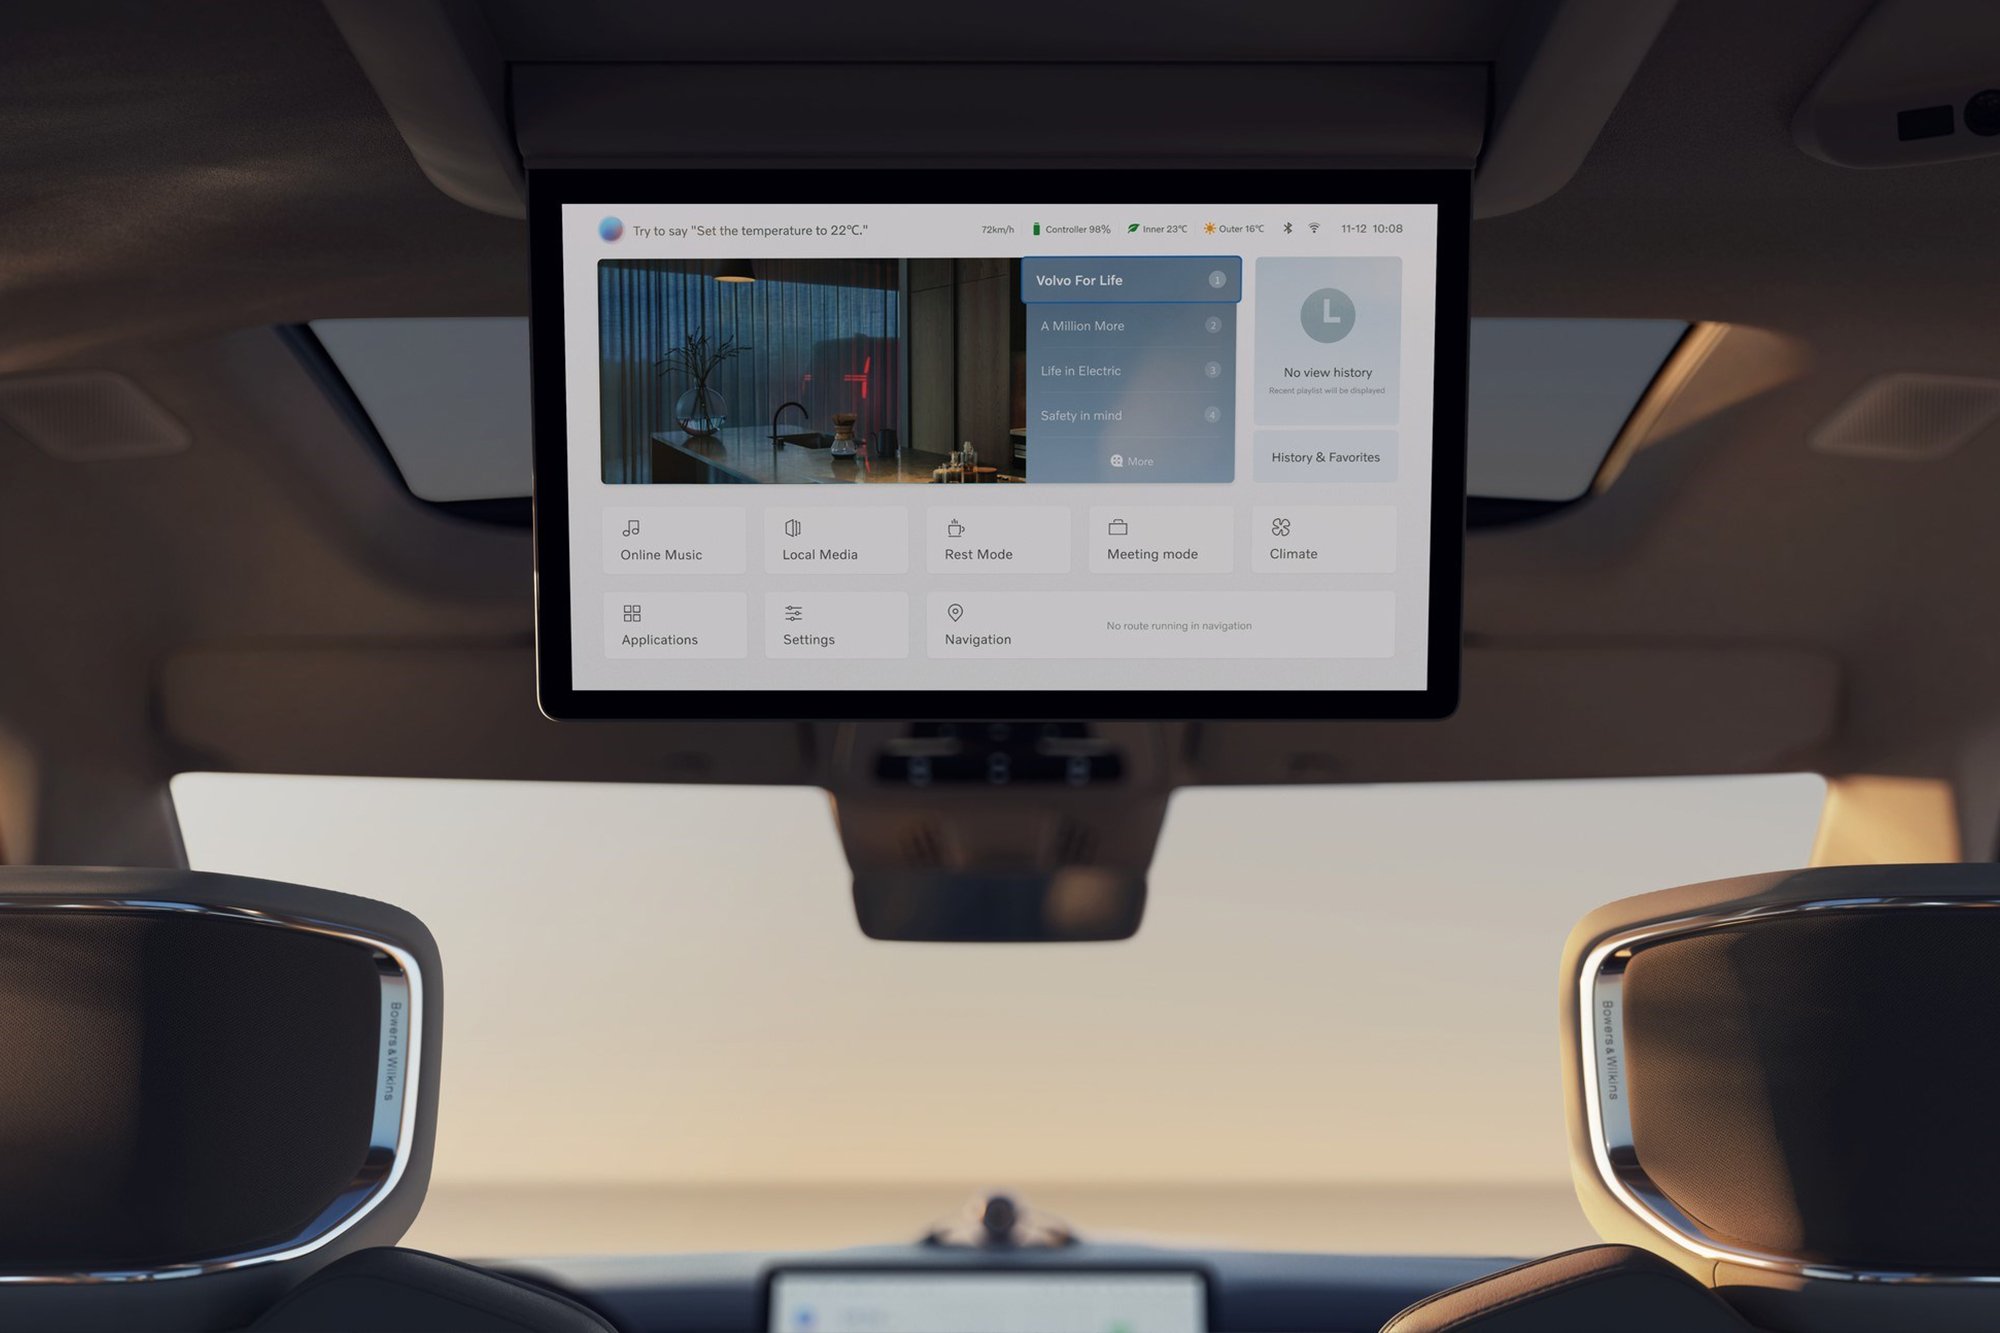 The sleek design and multi-functional screens of the Volvo EM90 